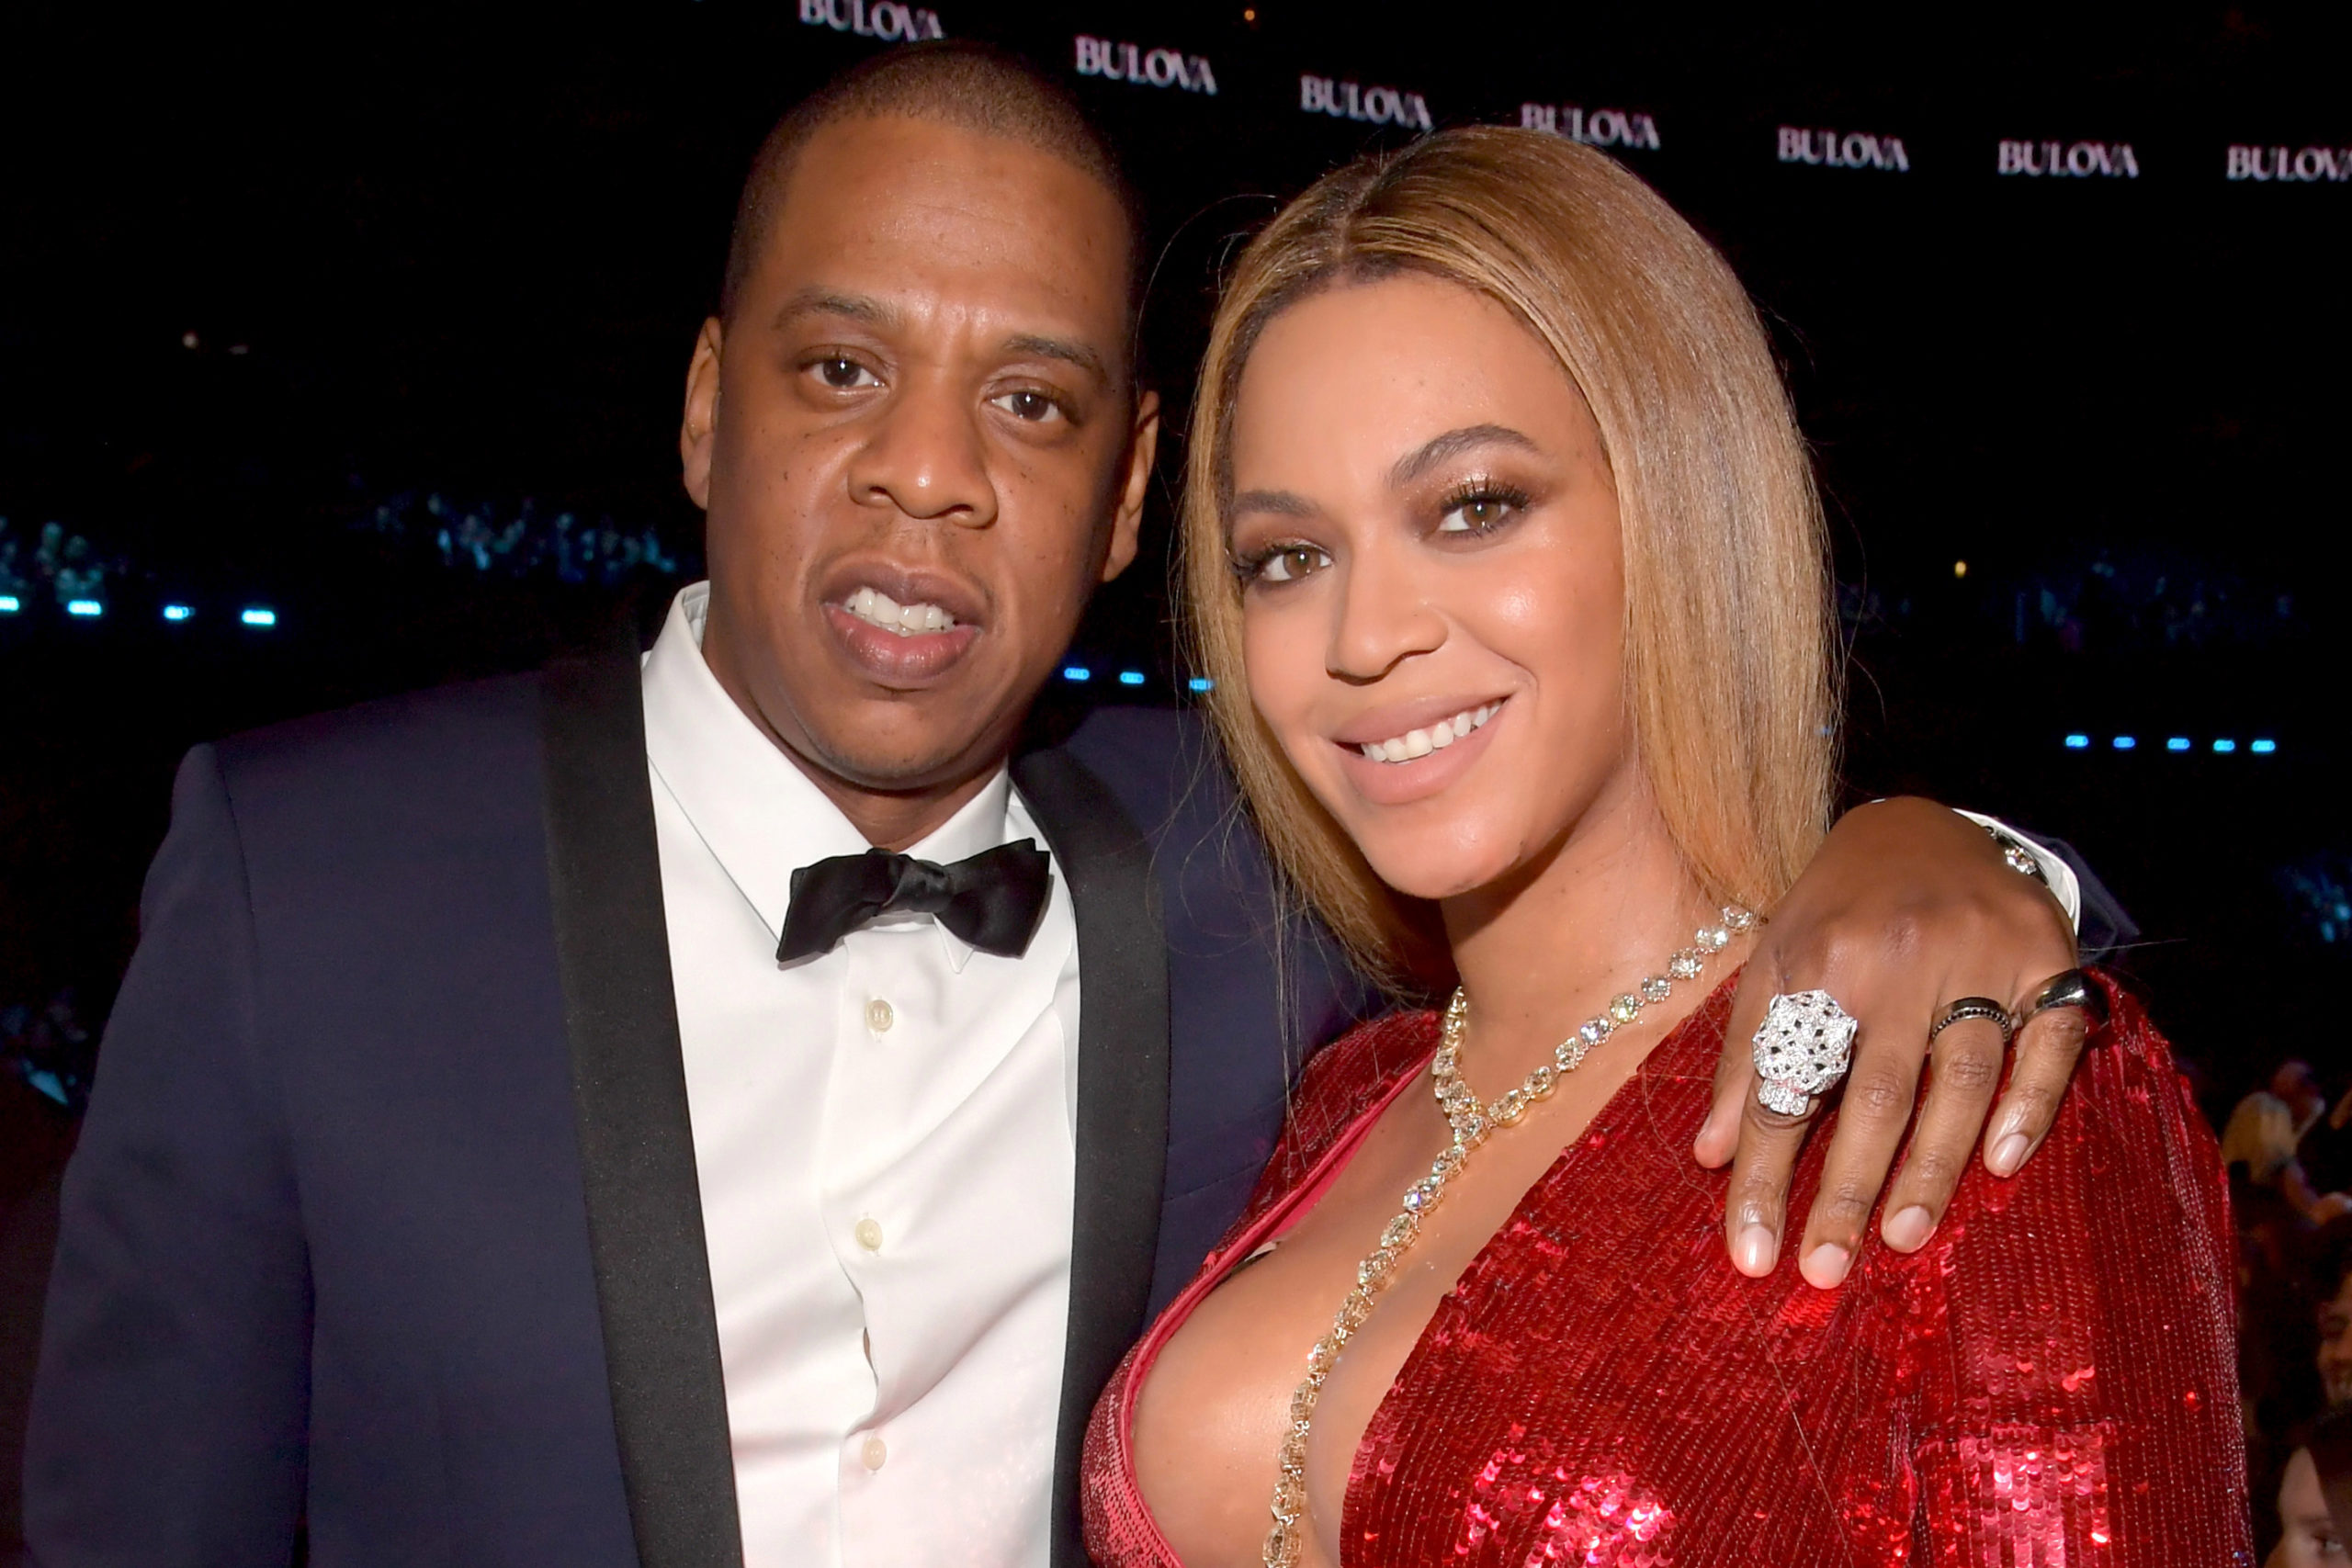 When did Beyoncé and Jay start dating?